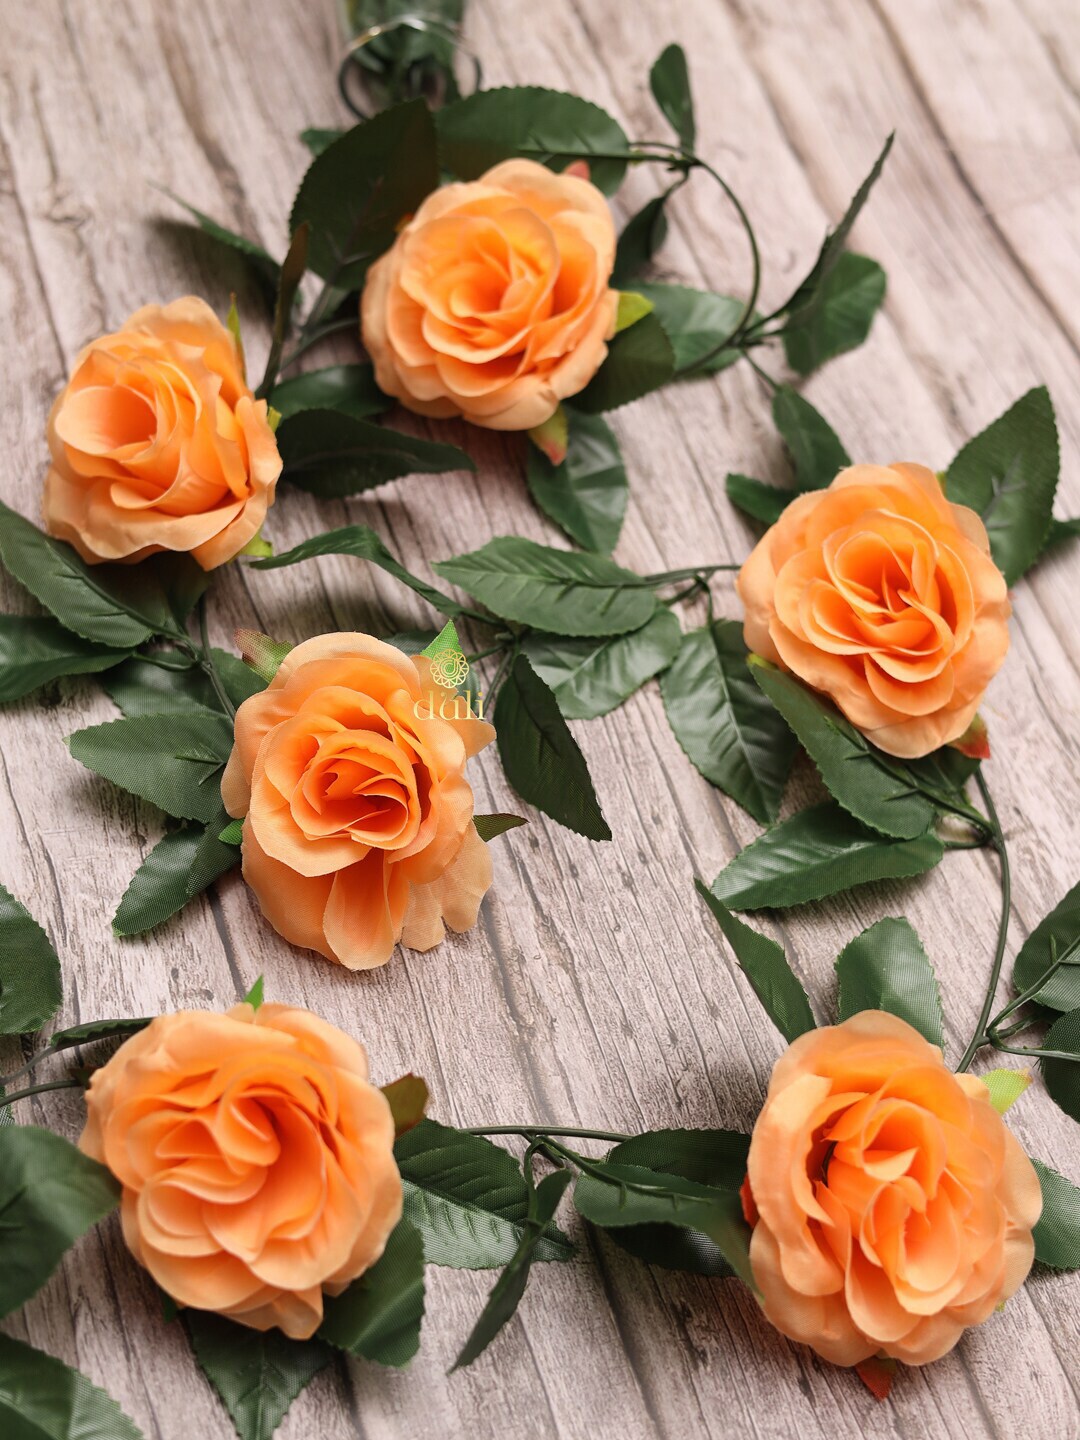 DULI Unisex Peach-Colored & Green Rose Artificial Flowers Price in India